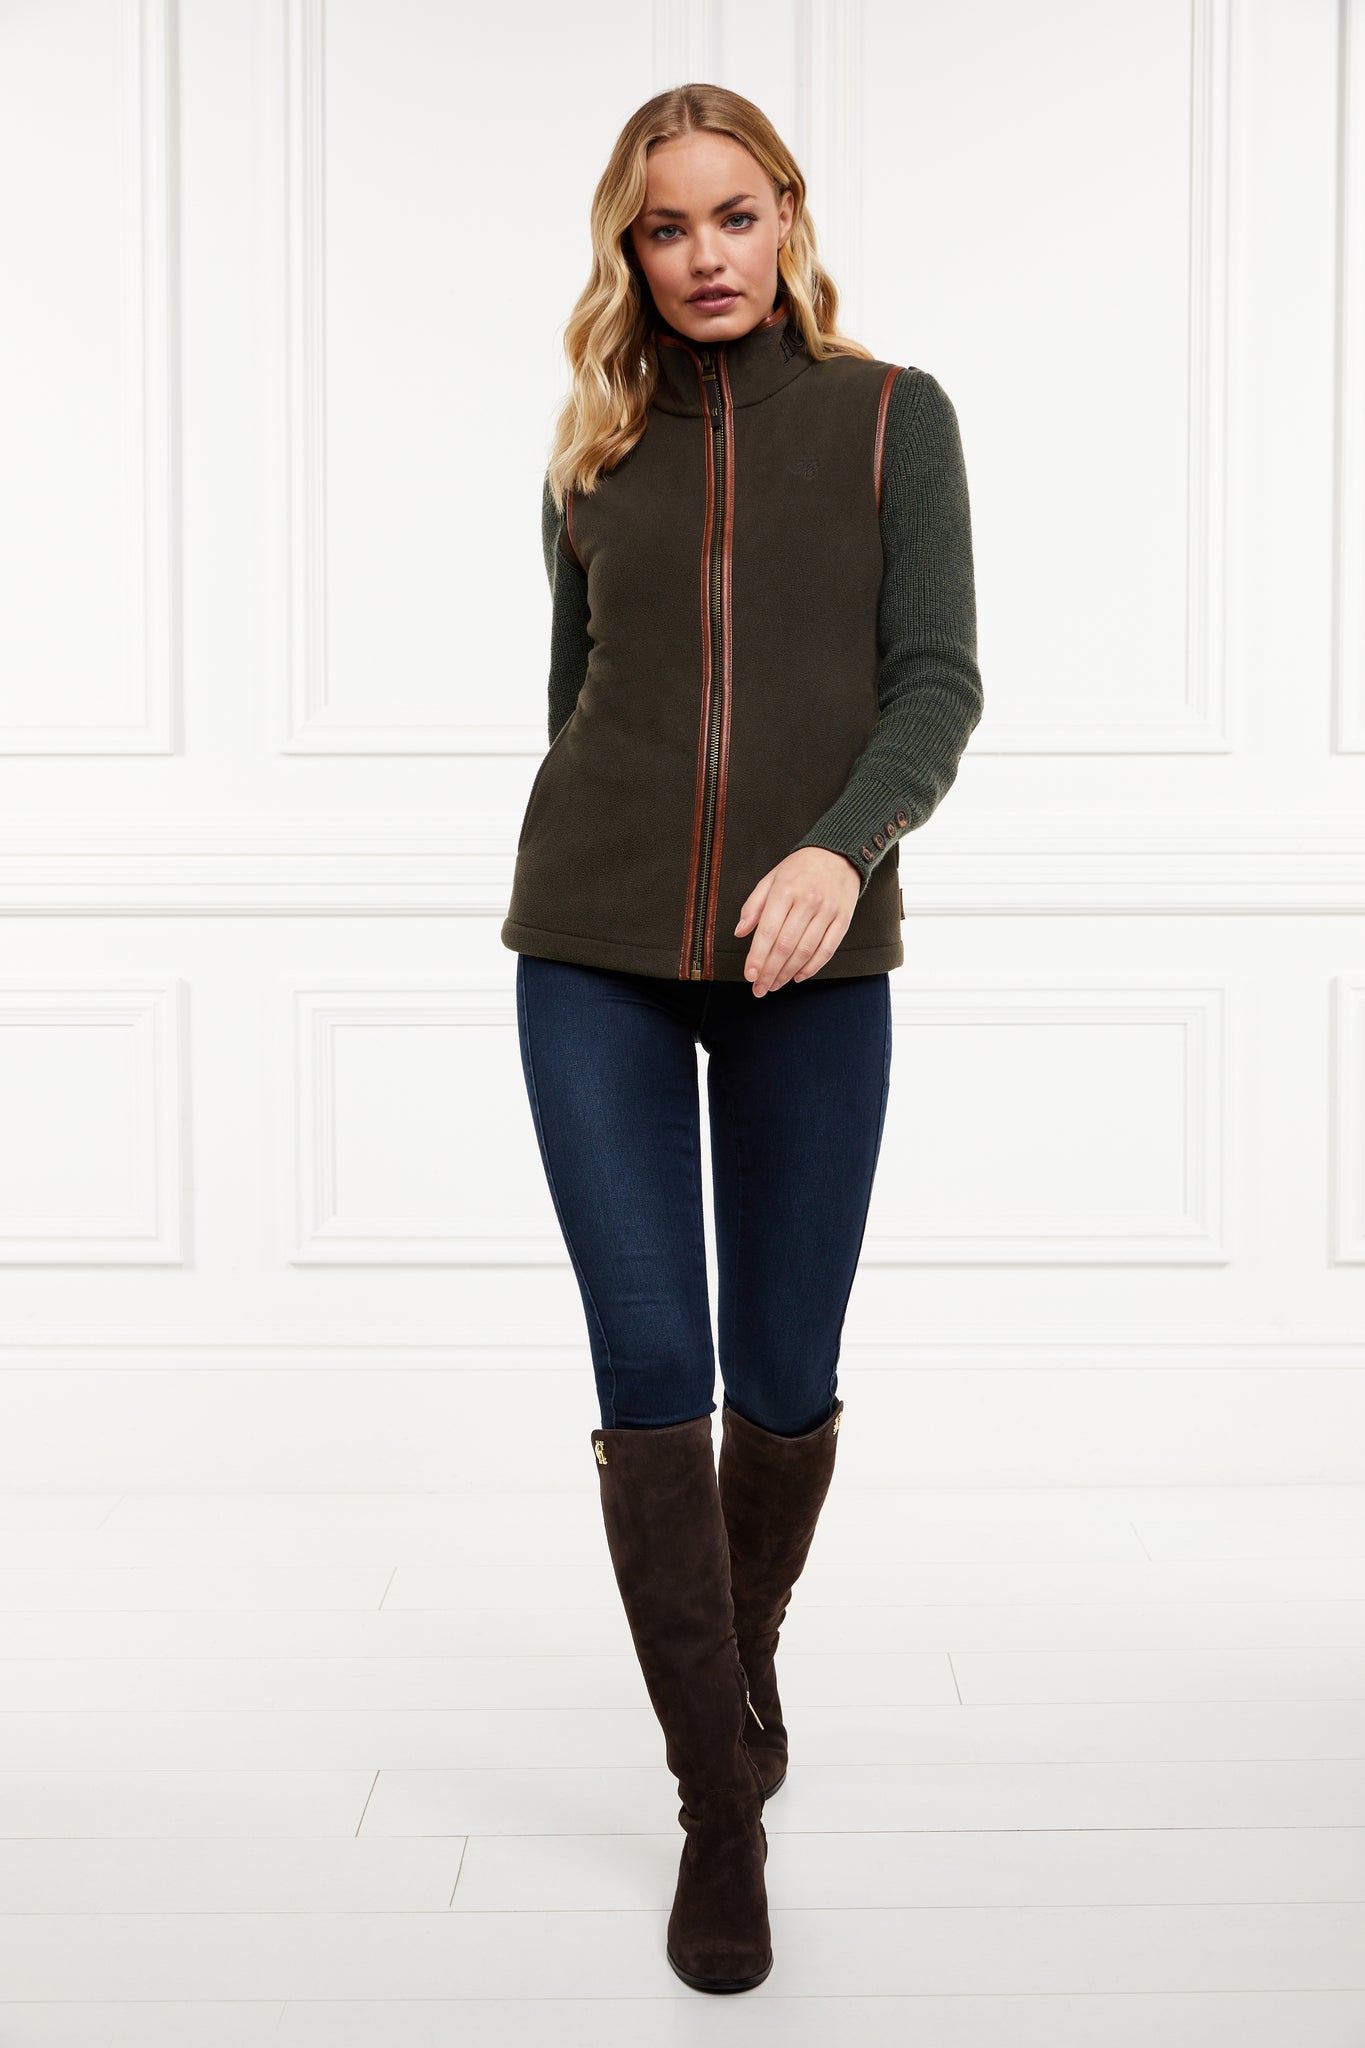 womens fleece gilet in khaki with tan leather piping around armholes neckline and down the front zip fastening worn with indigo skinny jeans and knee high suede boots in chocolate 